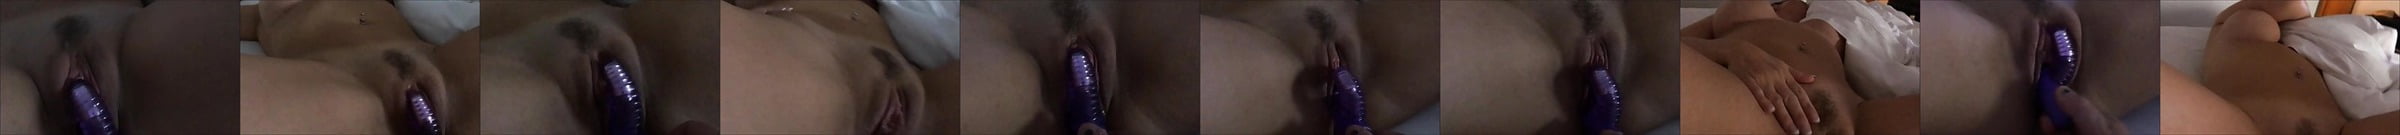 Double Vibrator Orgasm With Strong Contractions Porn 5f Xhamster